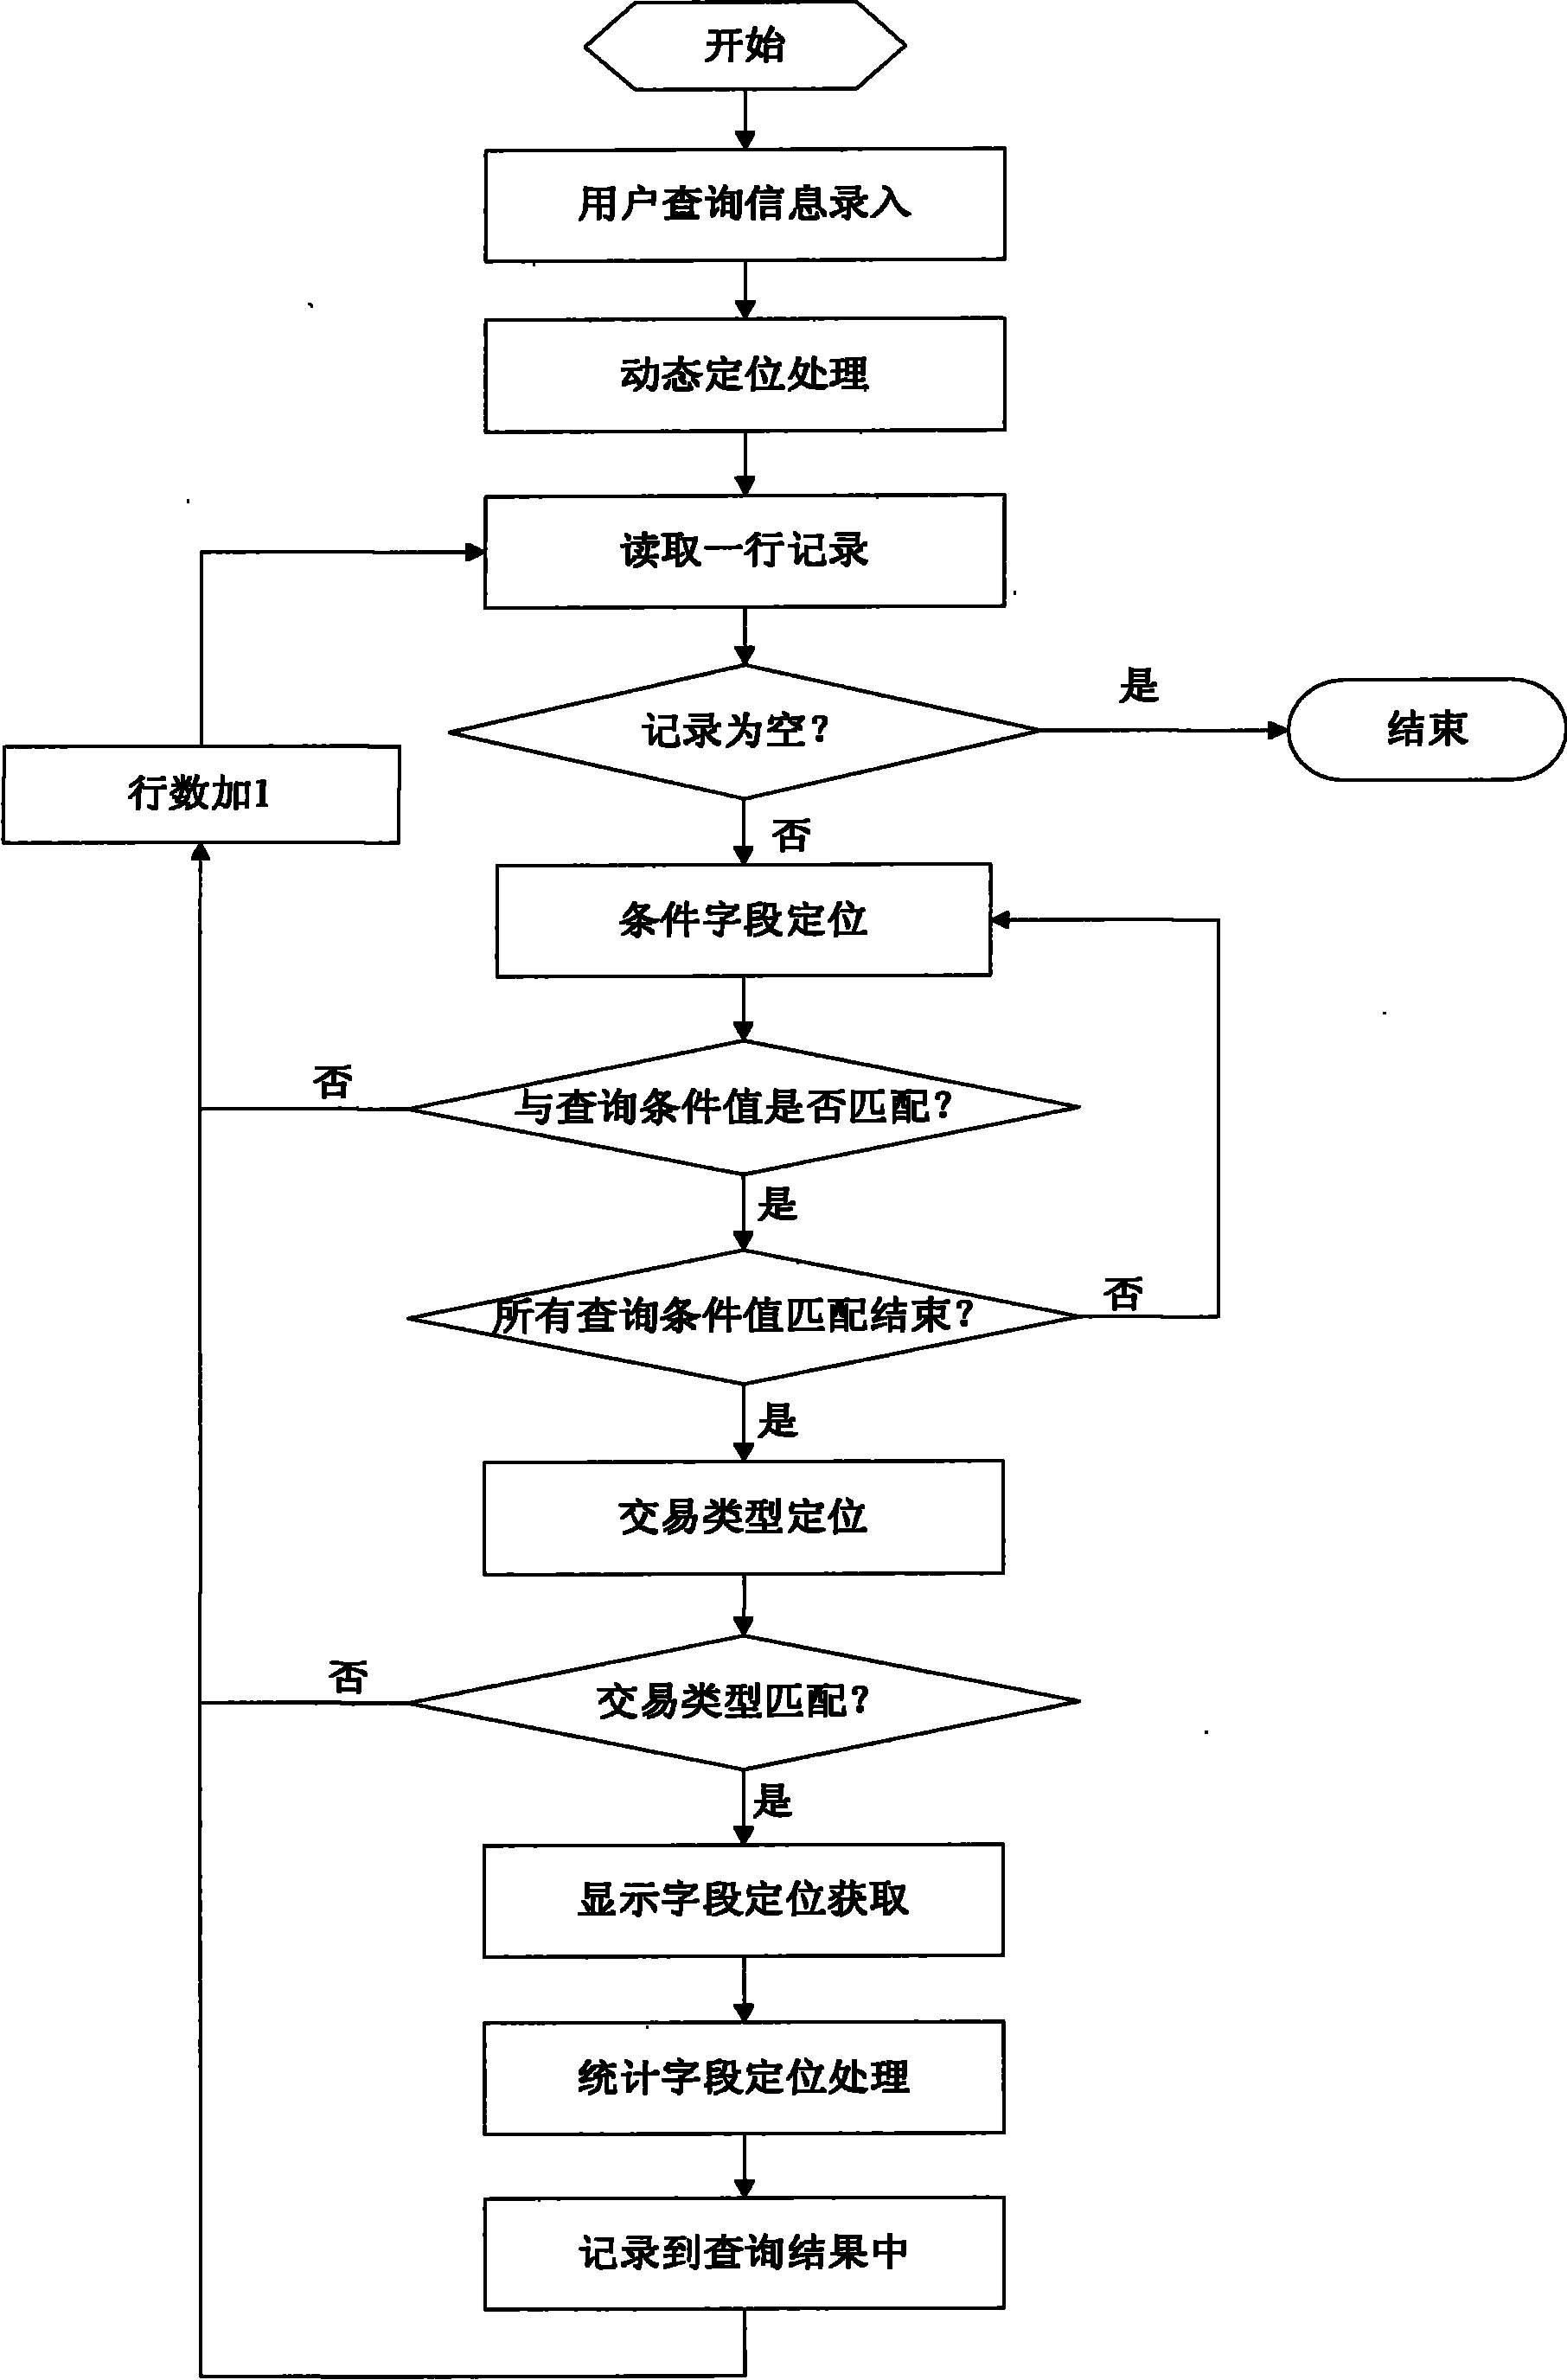 Dynamic file positioning and query method